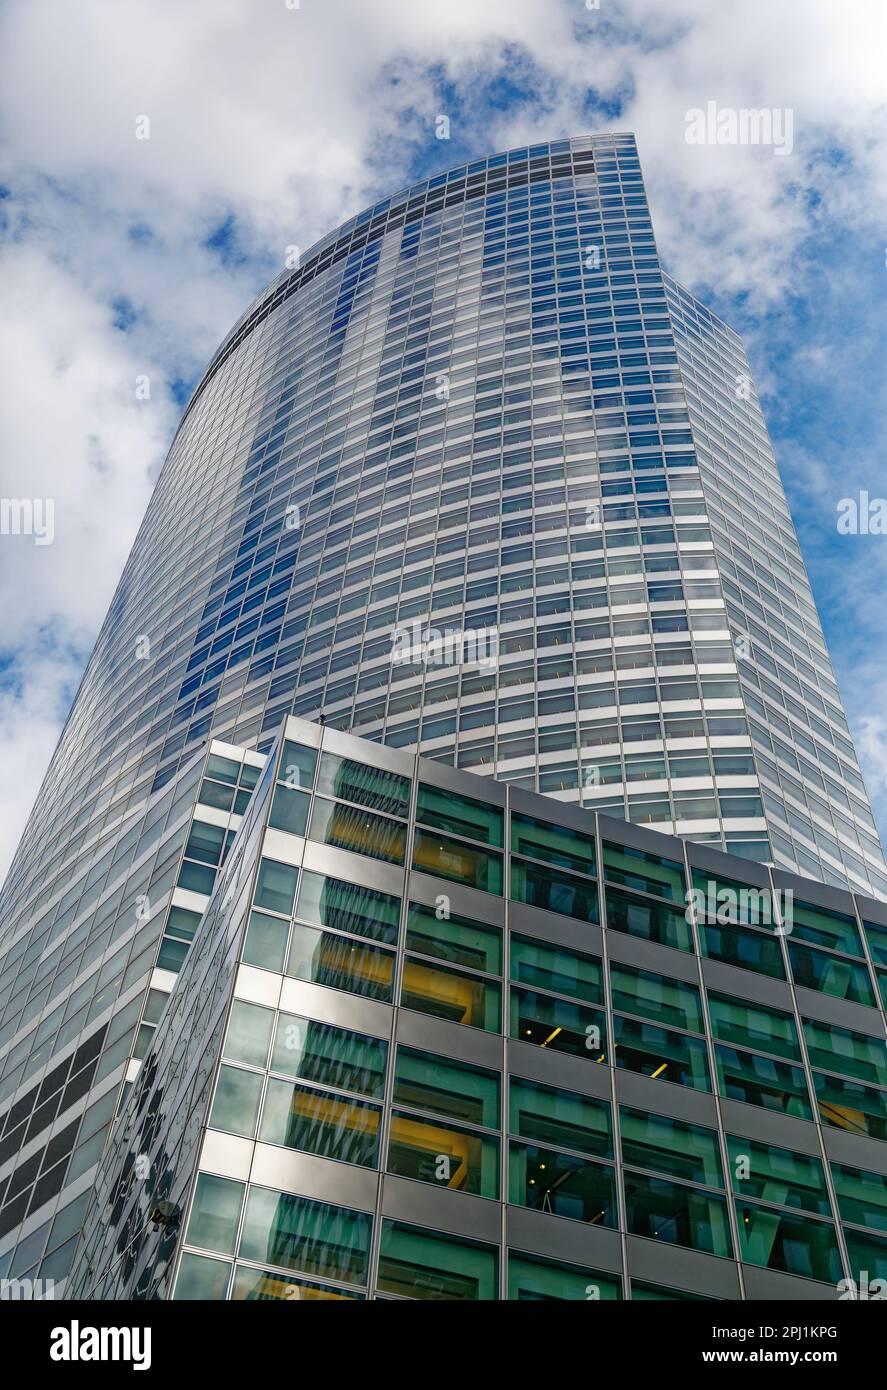 200 West Street, Goldman Sachs Headquarters, is the tallest building within Manhattan’s Battery Park City. It is also notable for the curved façade. Stock Photo